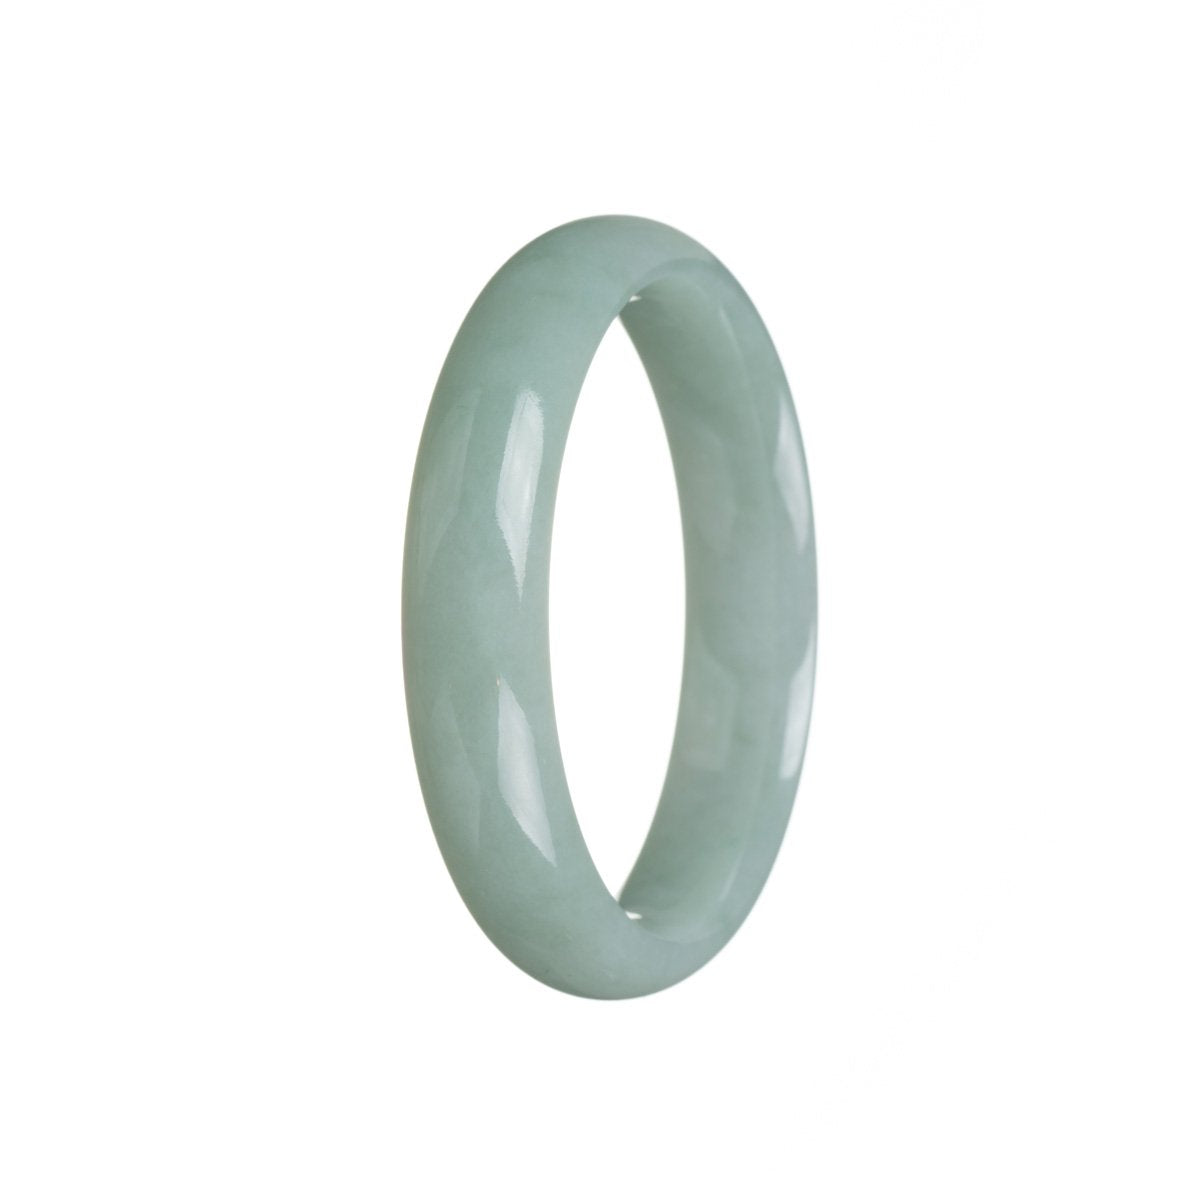 A close-up image of a beautiful, half-moon shaped green jadeite jade bracelet. The jade has a natural light green color and is certified as authentic. The bracelet measures 56mm in diameter and is a stunning piece of jewelry from the MAYS™ brand.